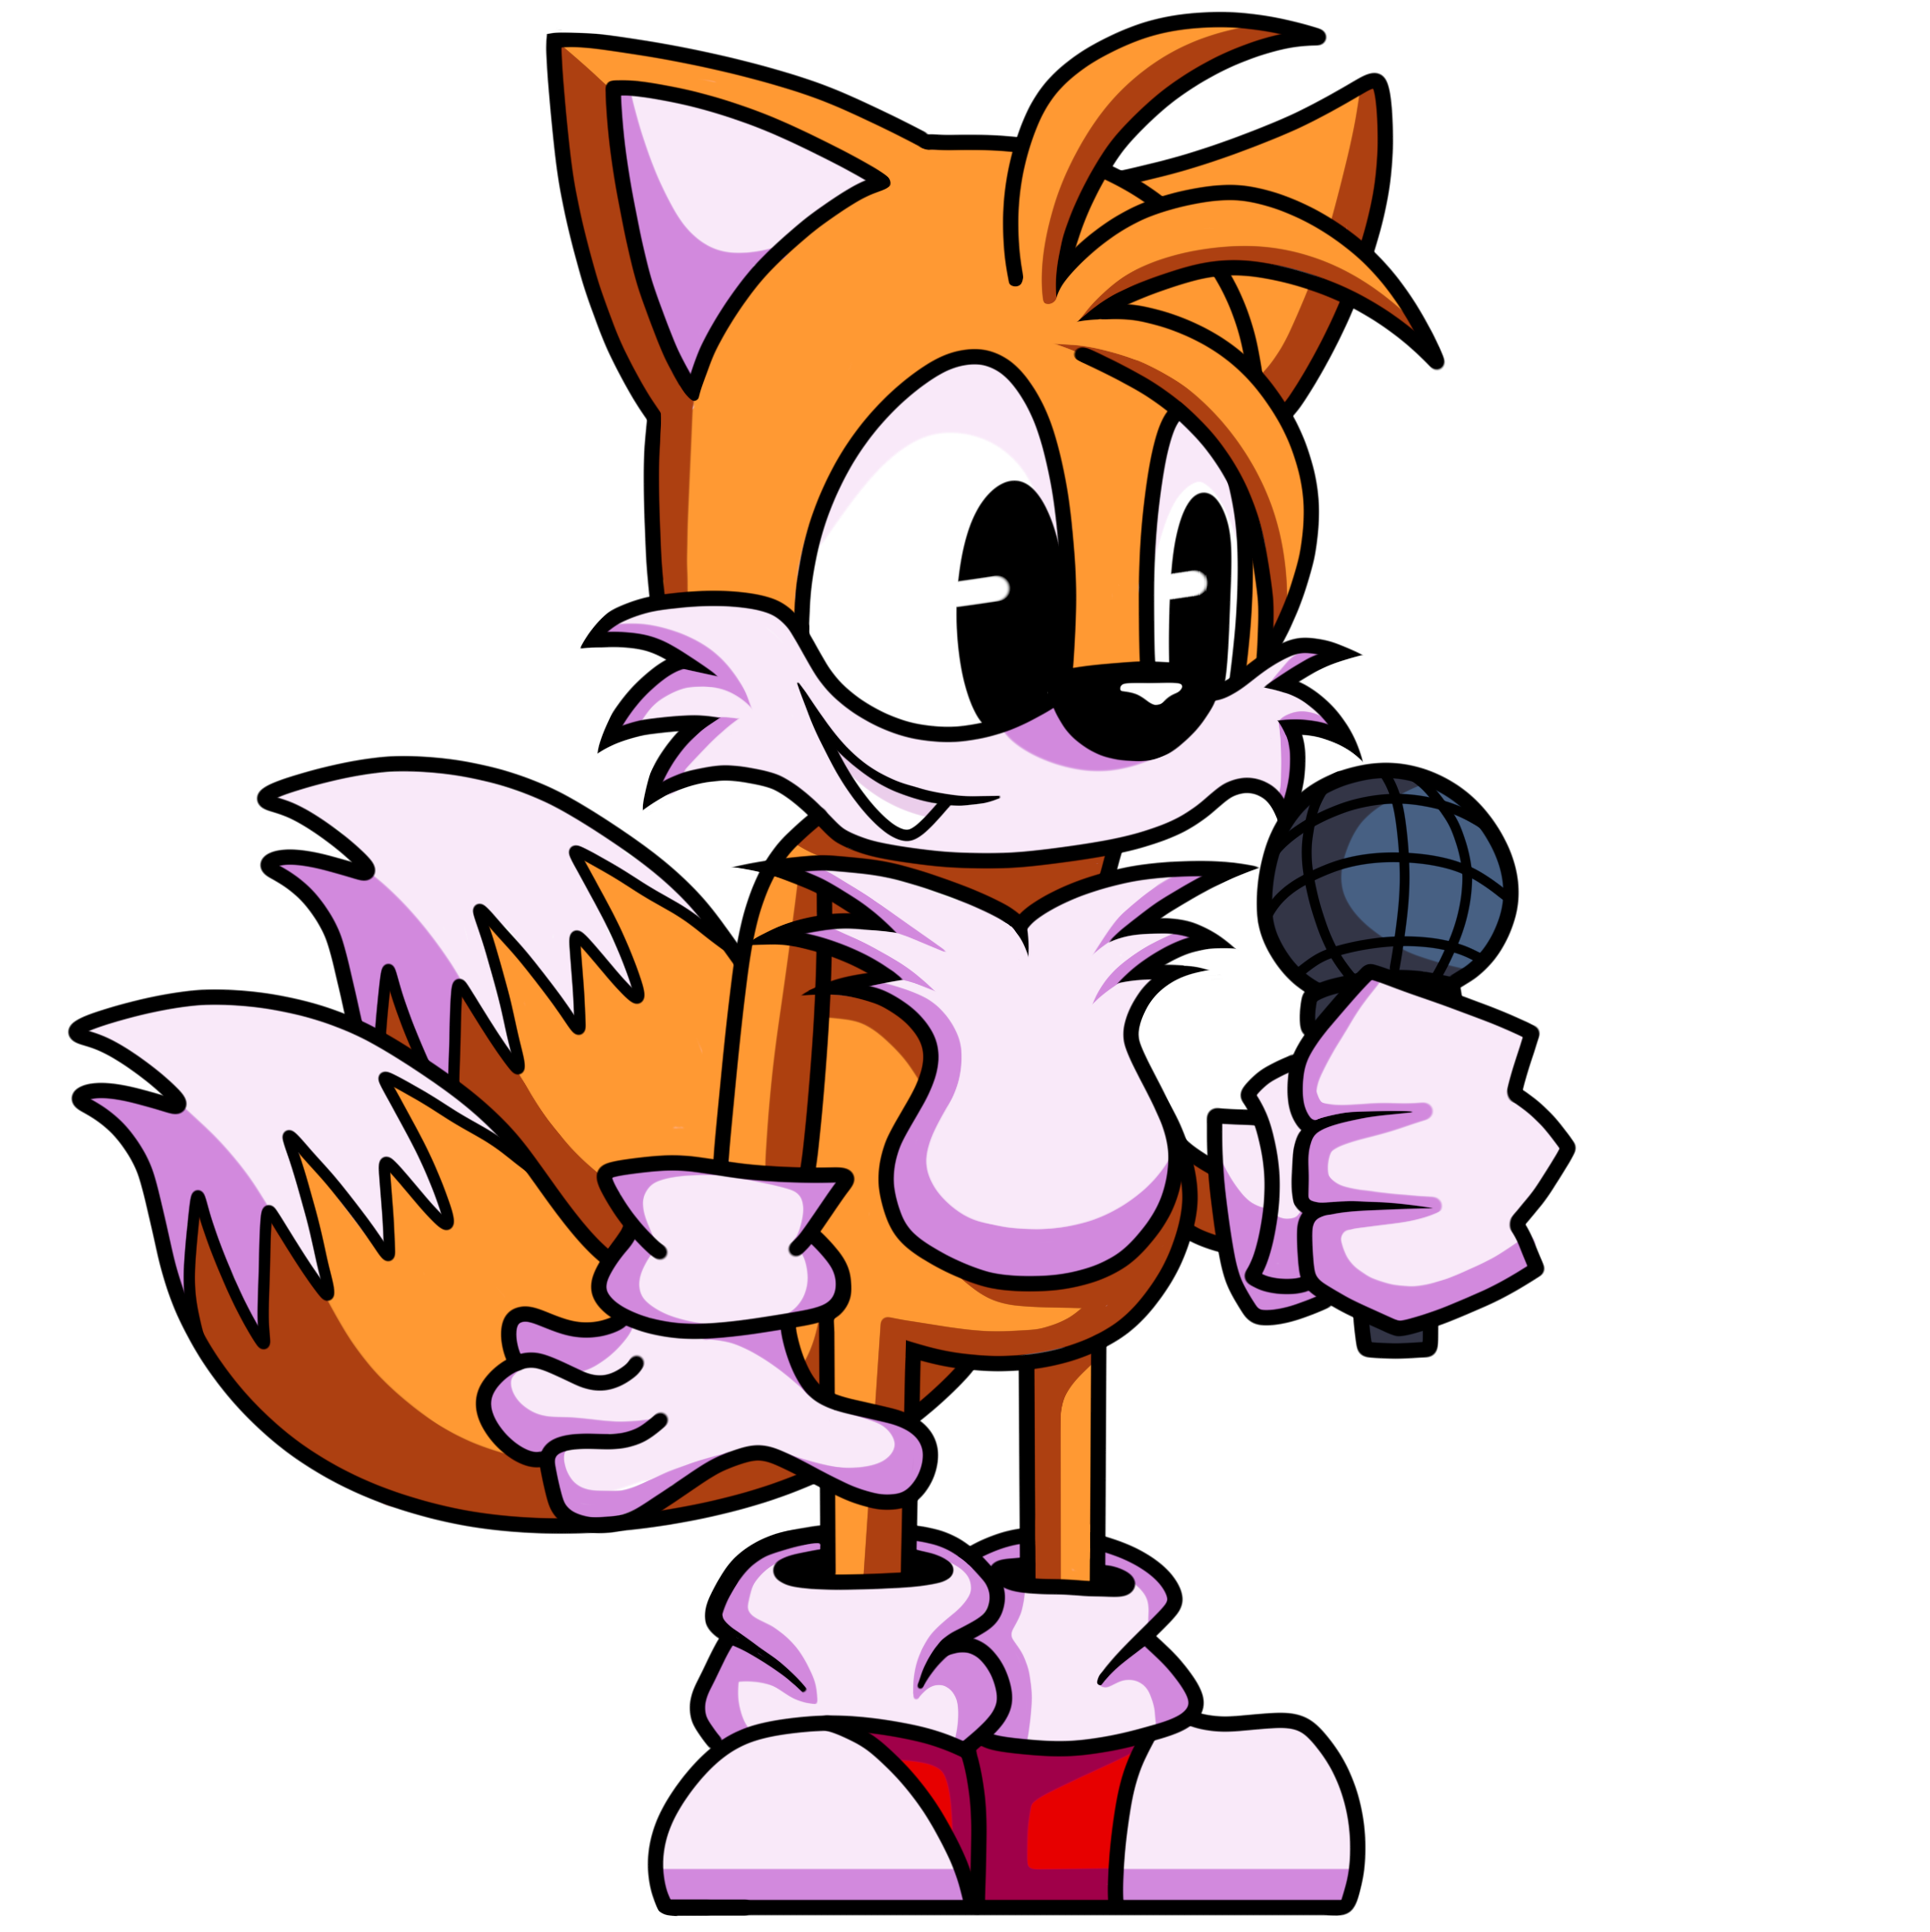 Animated] Tails Soul Encore by Aguythatexists on Newgrounds